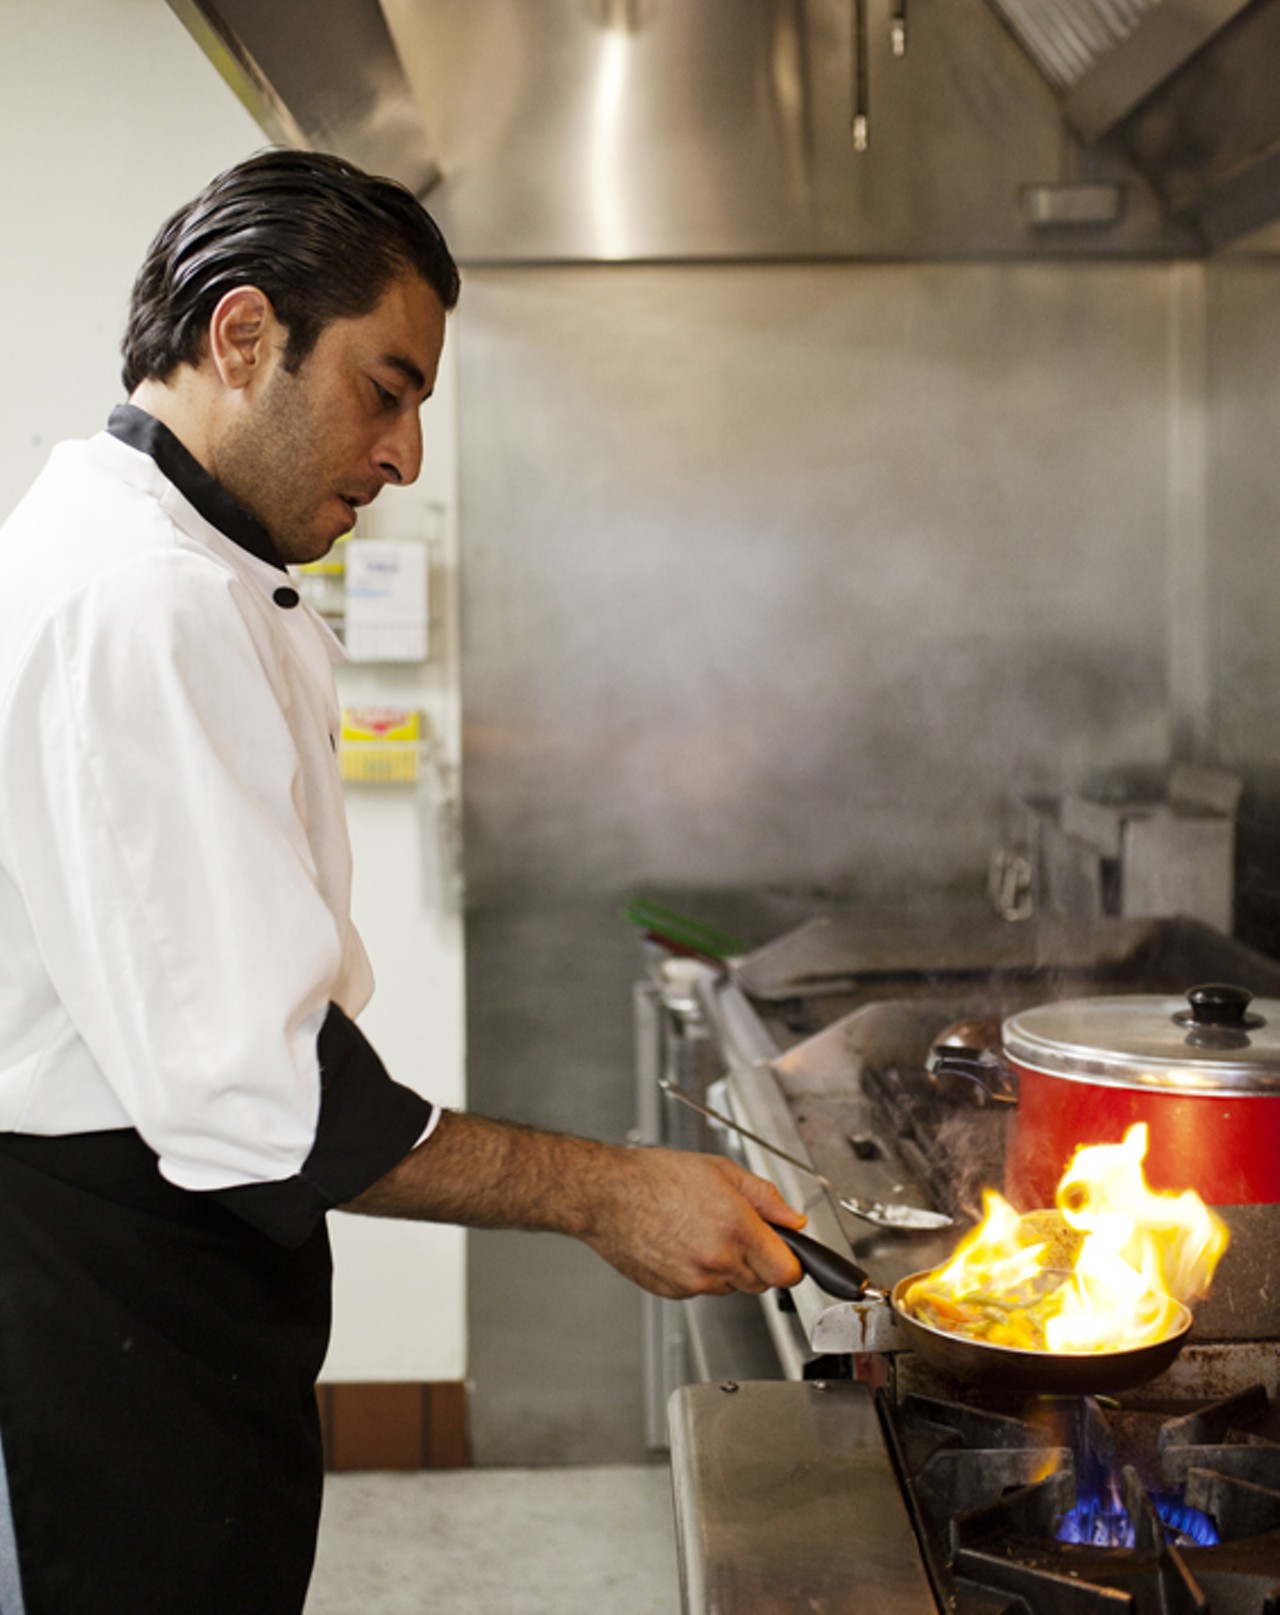 Chef Wasam Hamed in the kitchen at Layla.